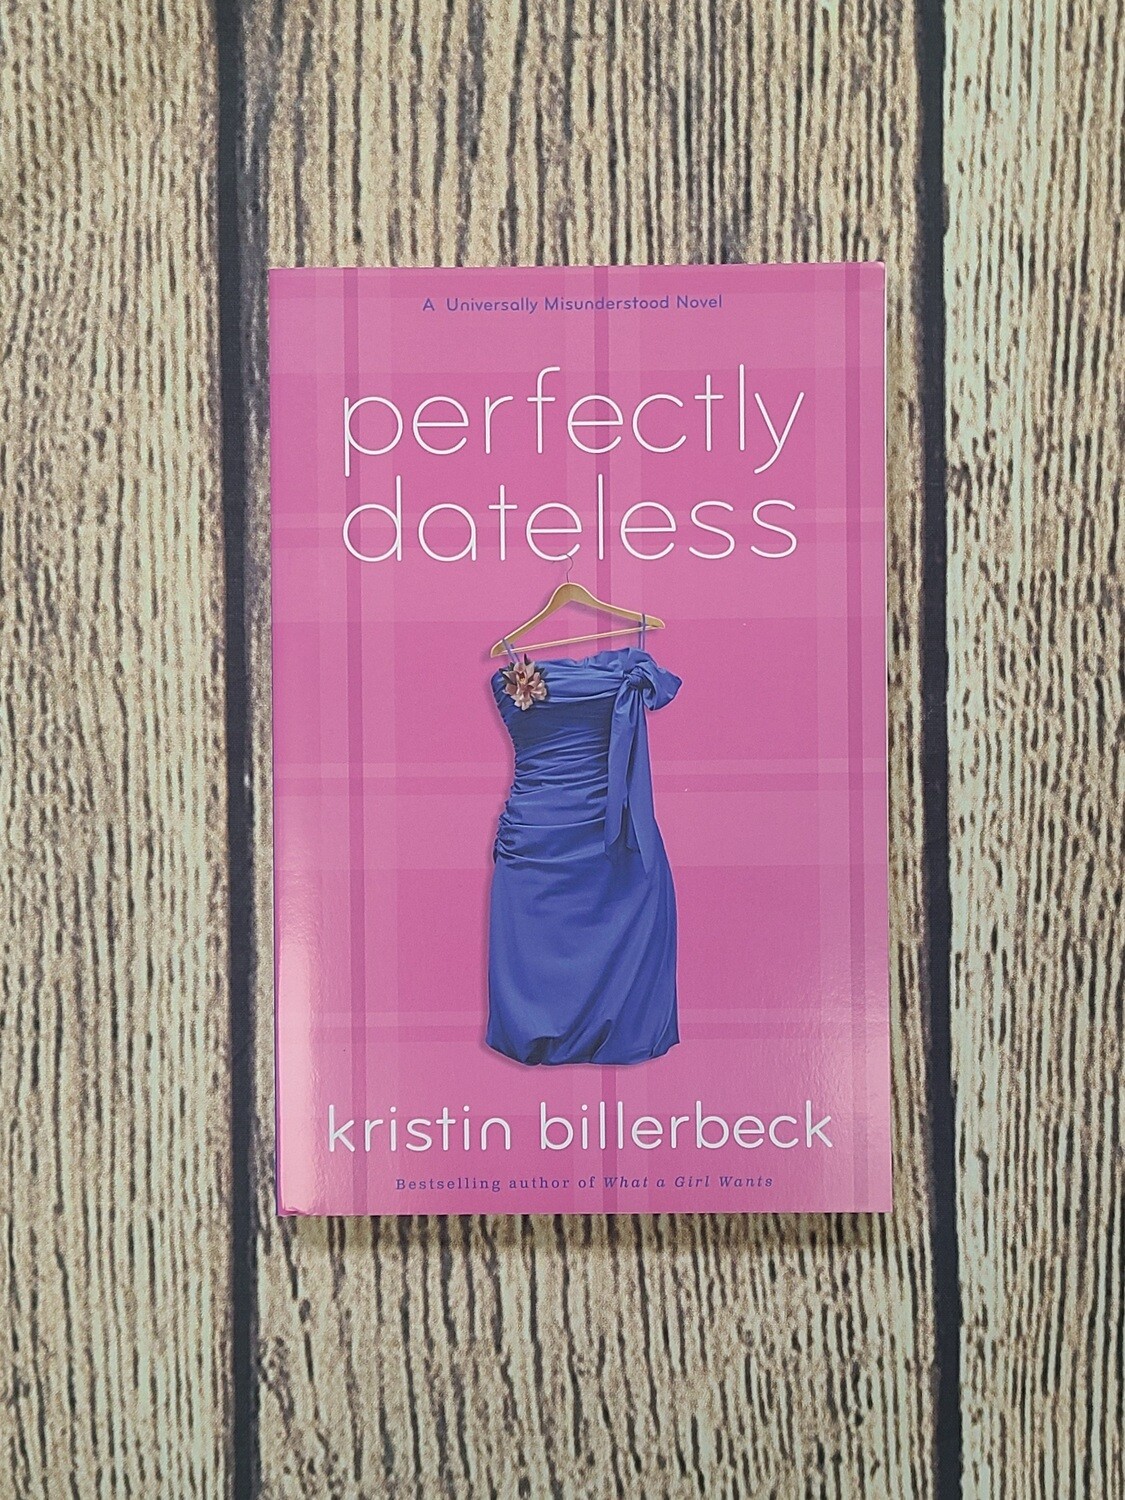 Perfectly Dateless by Kristin Billerbeck